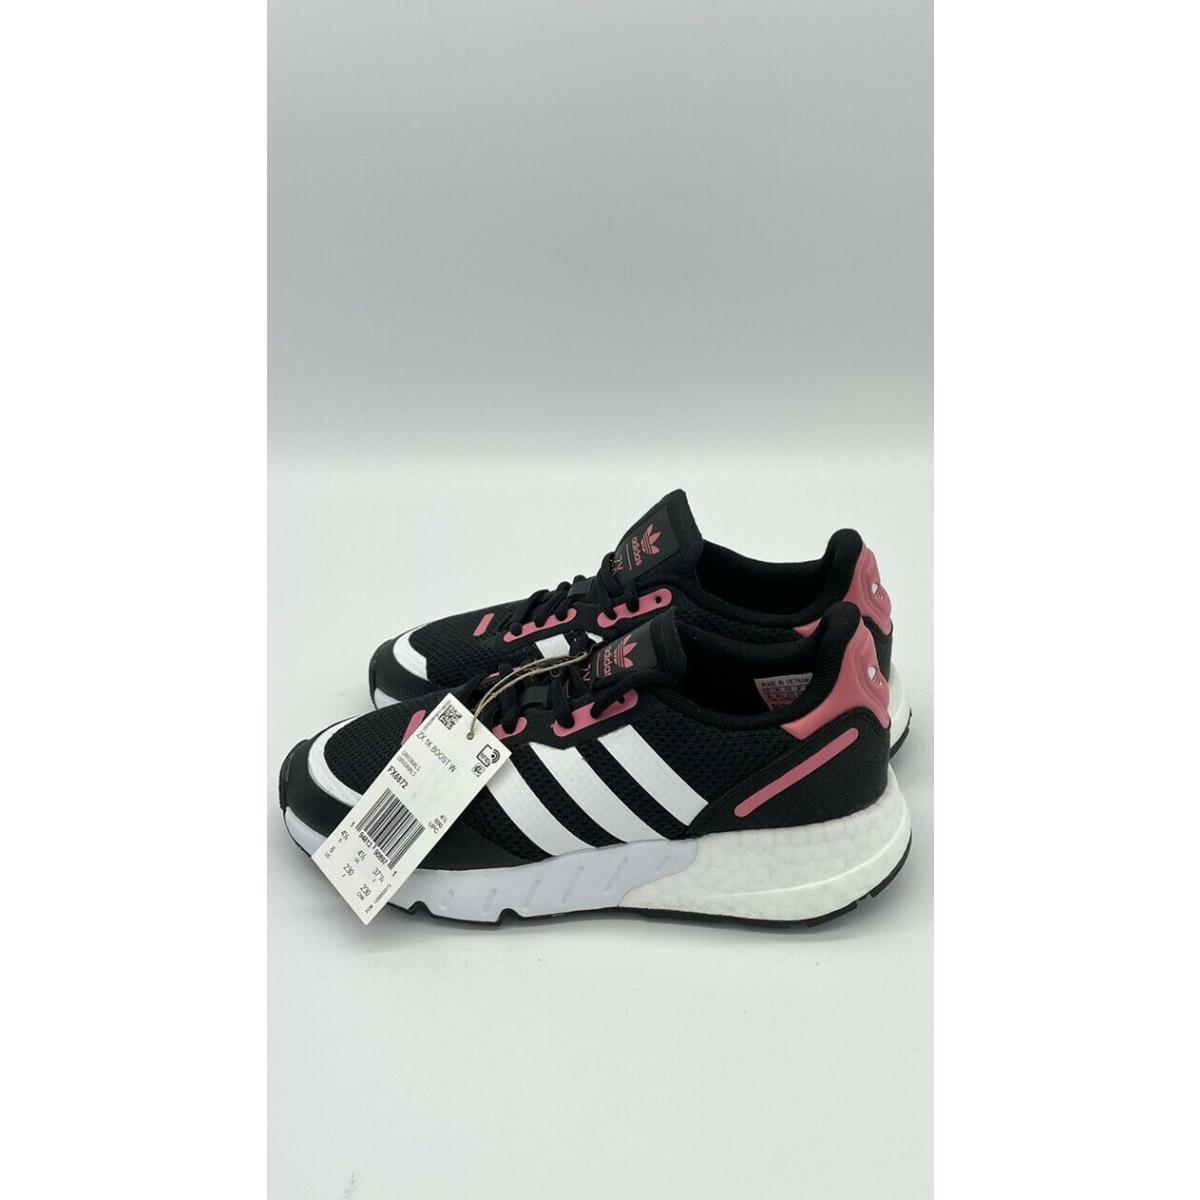 Adidas Originals ZX 1K Boost Athletic Shoes Womens Size 6 Hazy 